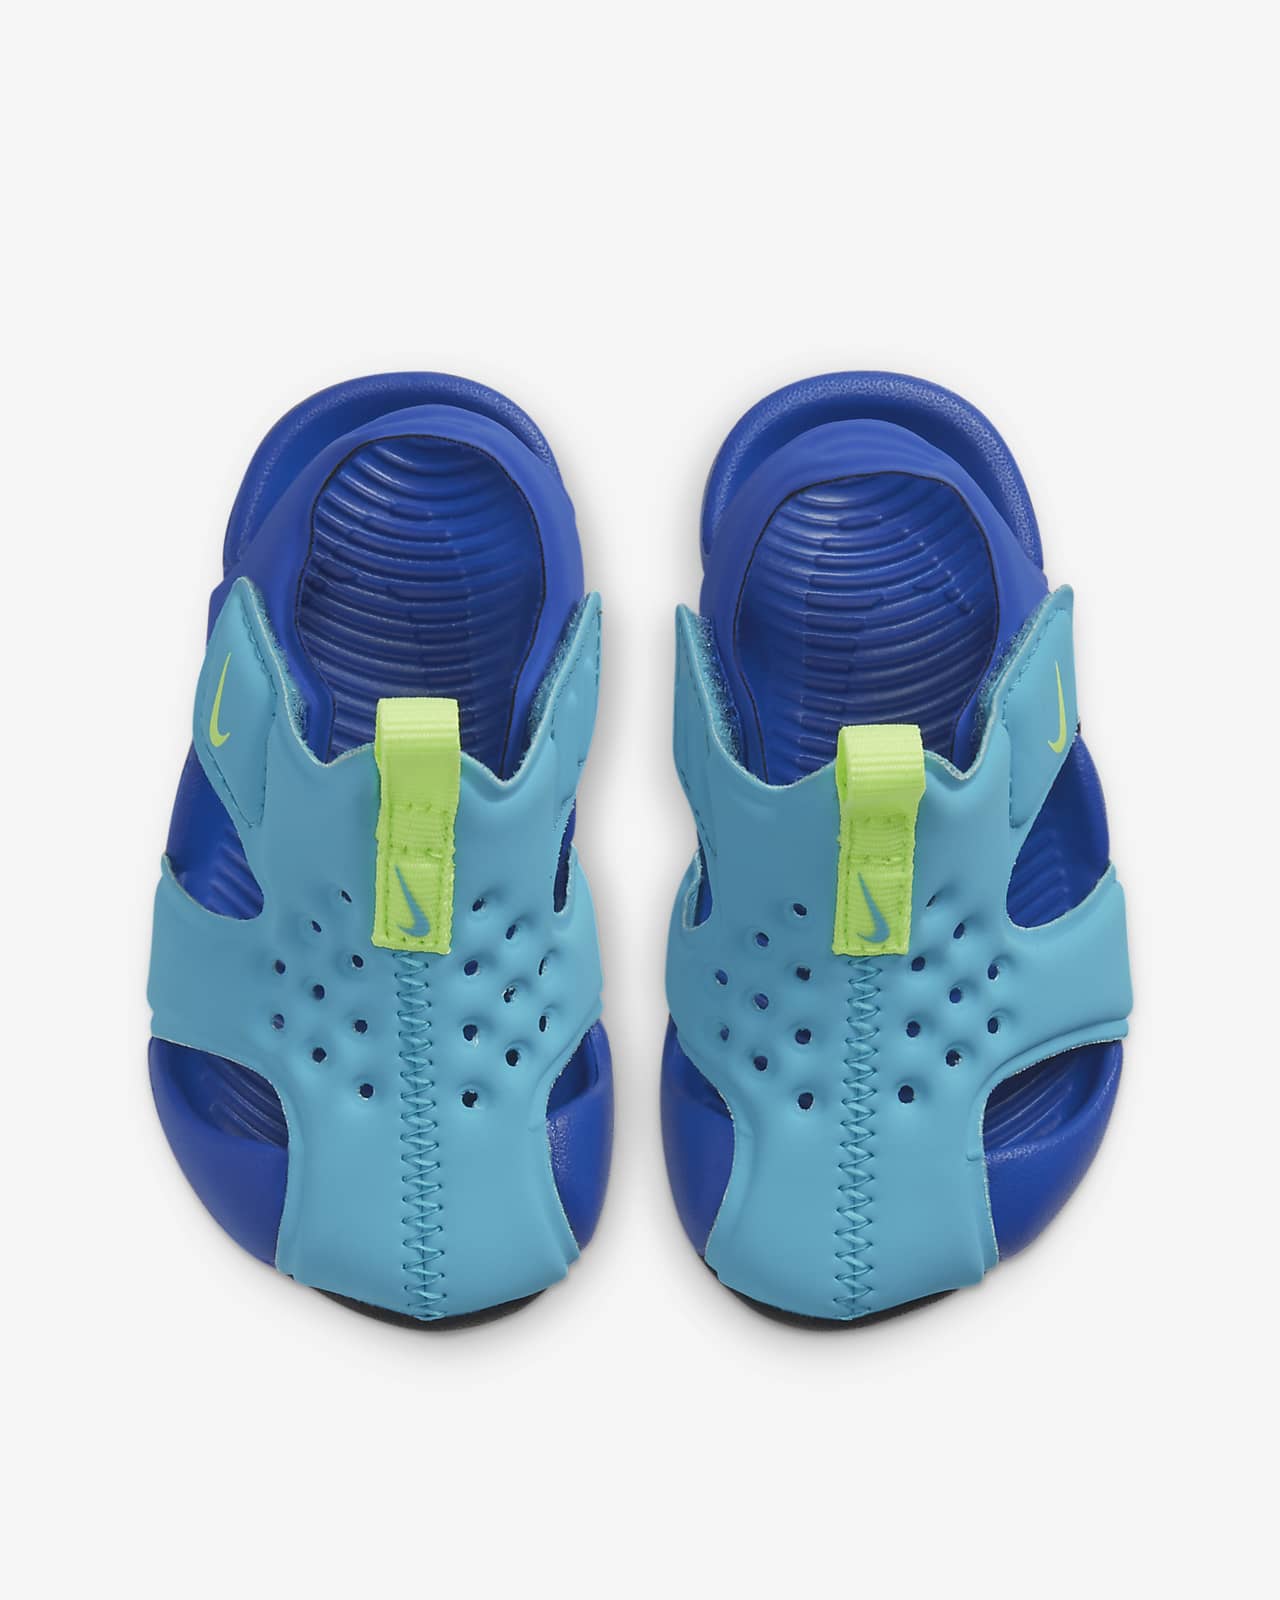 Nike Sunray Protect 2 Baby/Toddler 